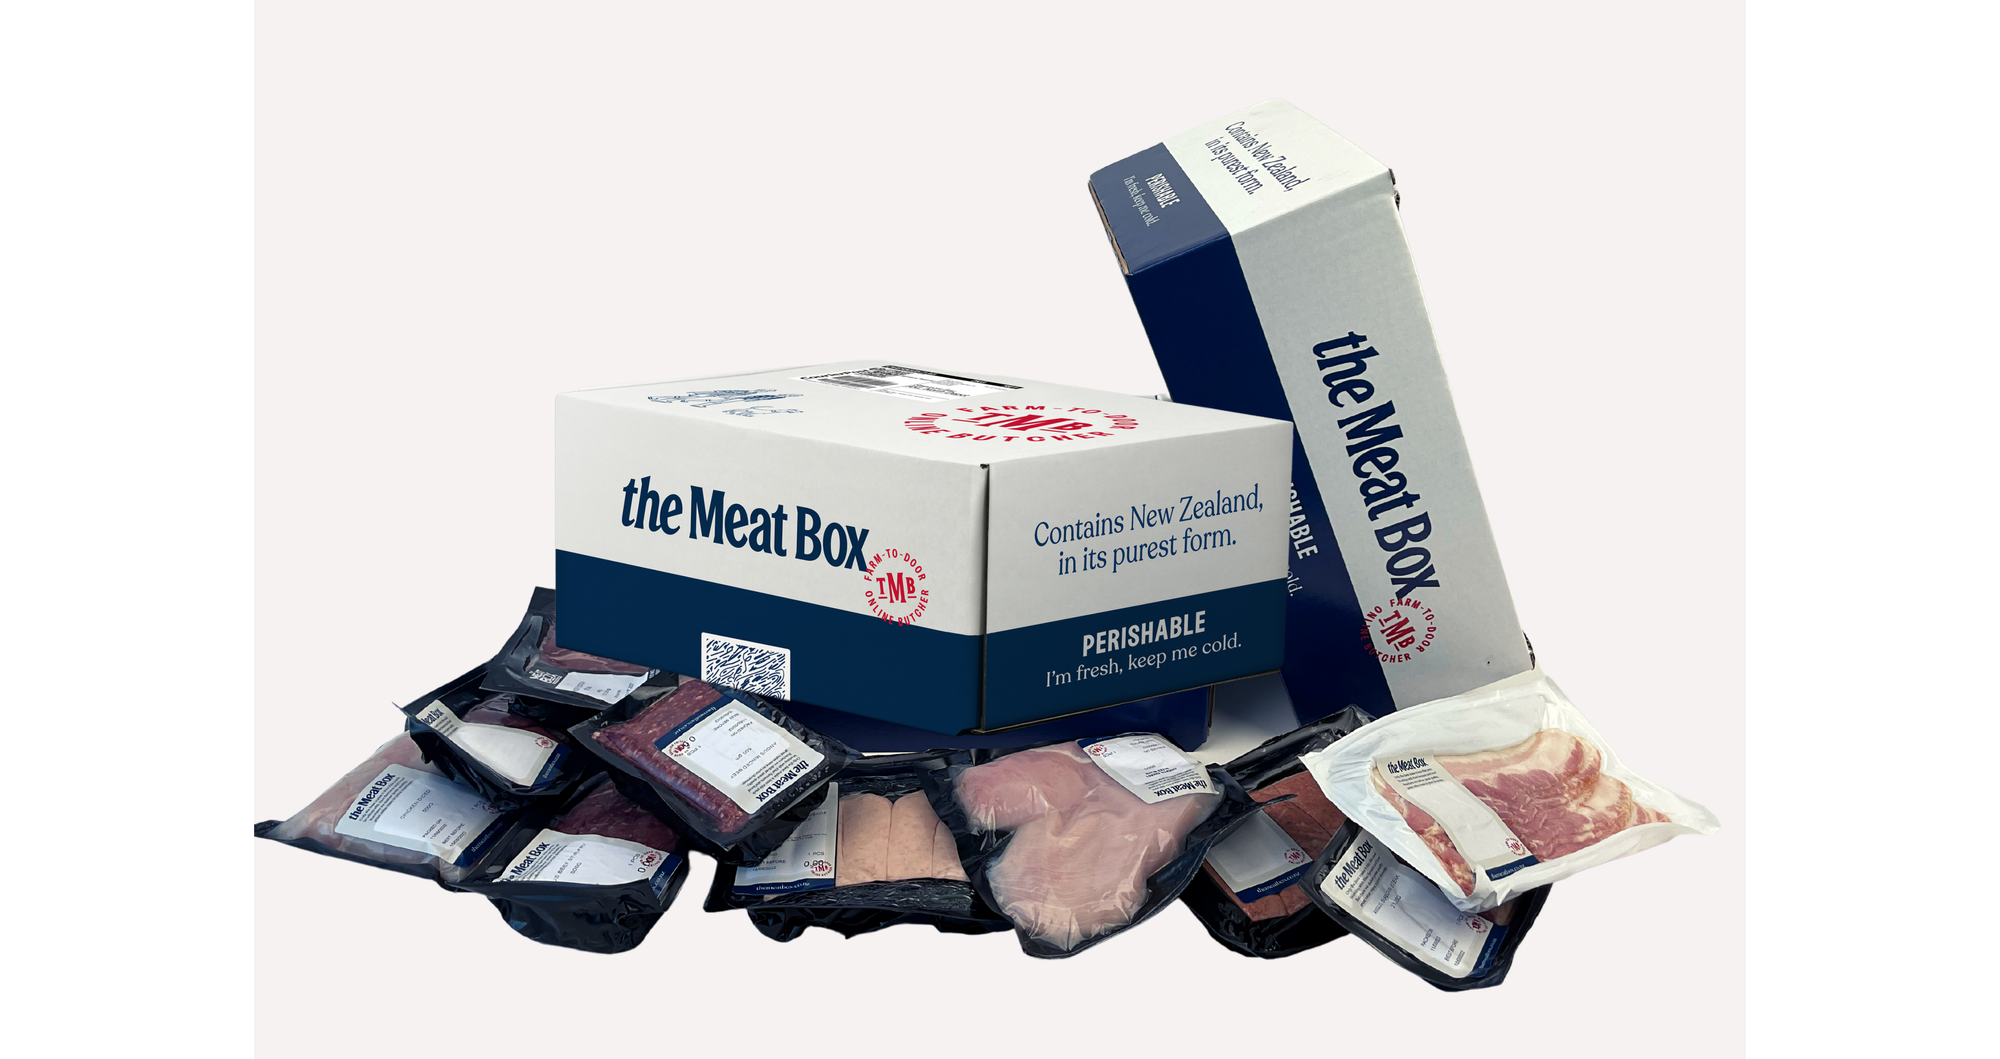 Easy Access to Superior Meat - The Meat Box